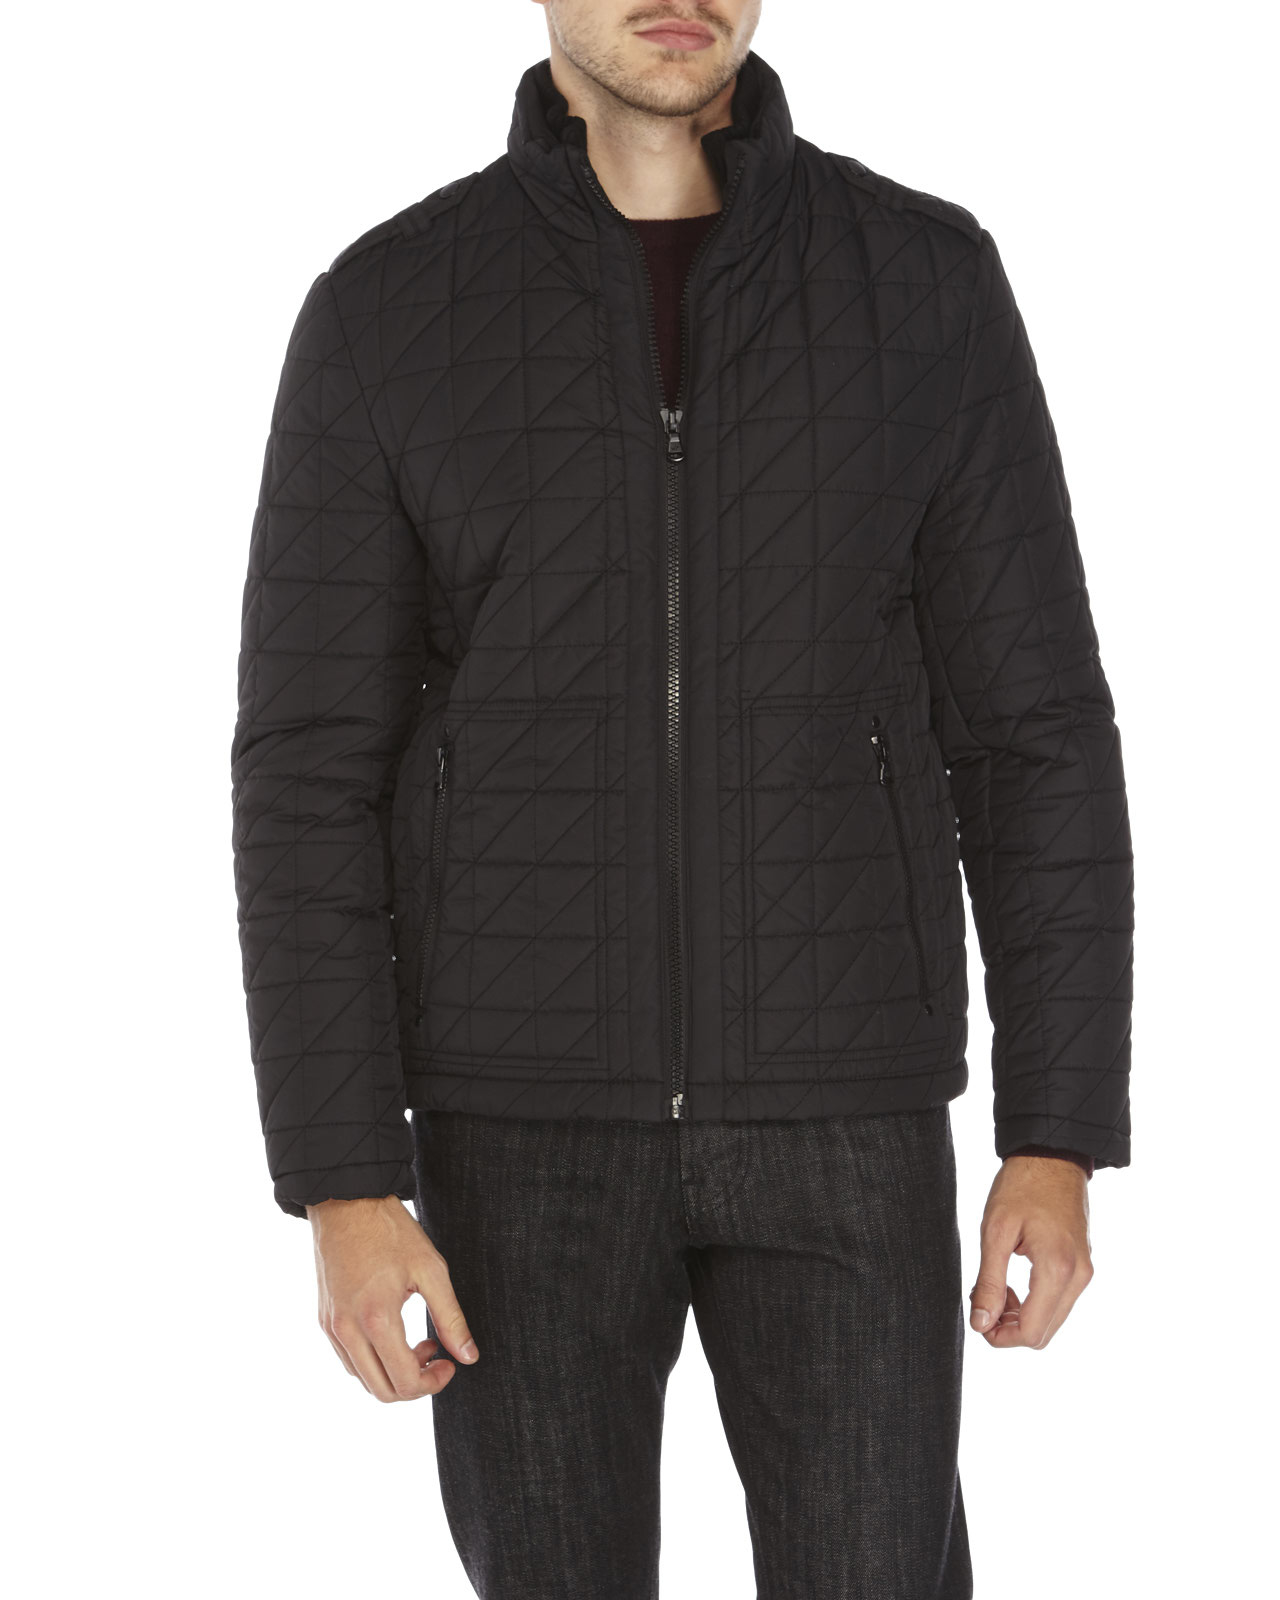 Lyst - Kenneth Cole Reaction Black Quilted Jacket in Black for Men